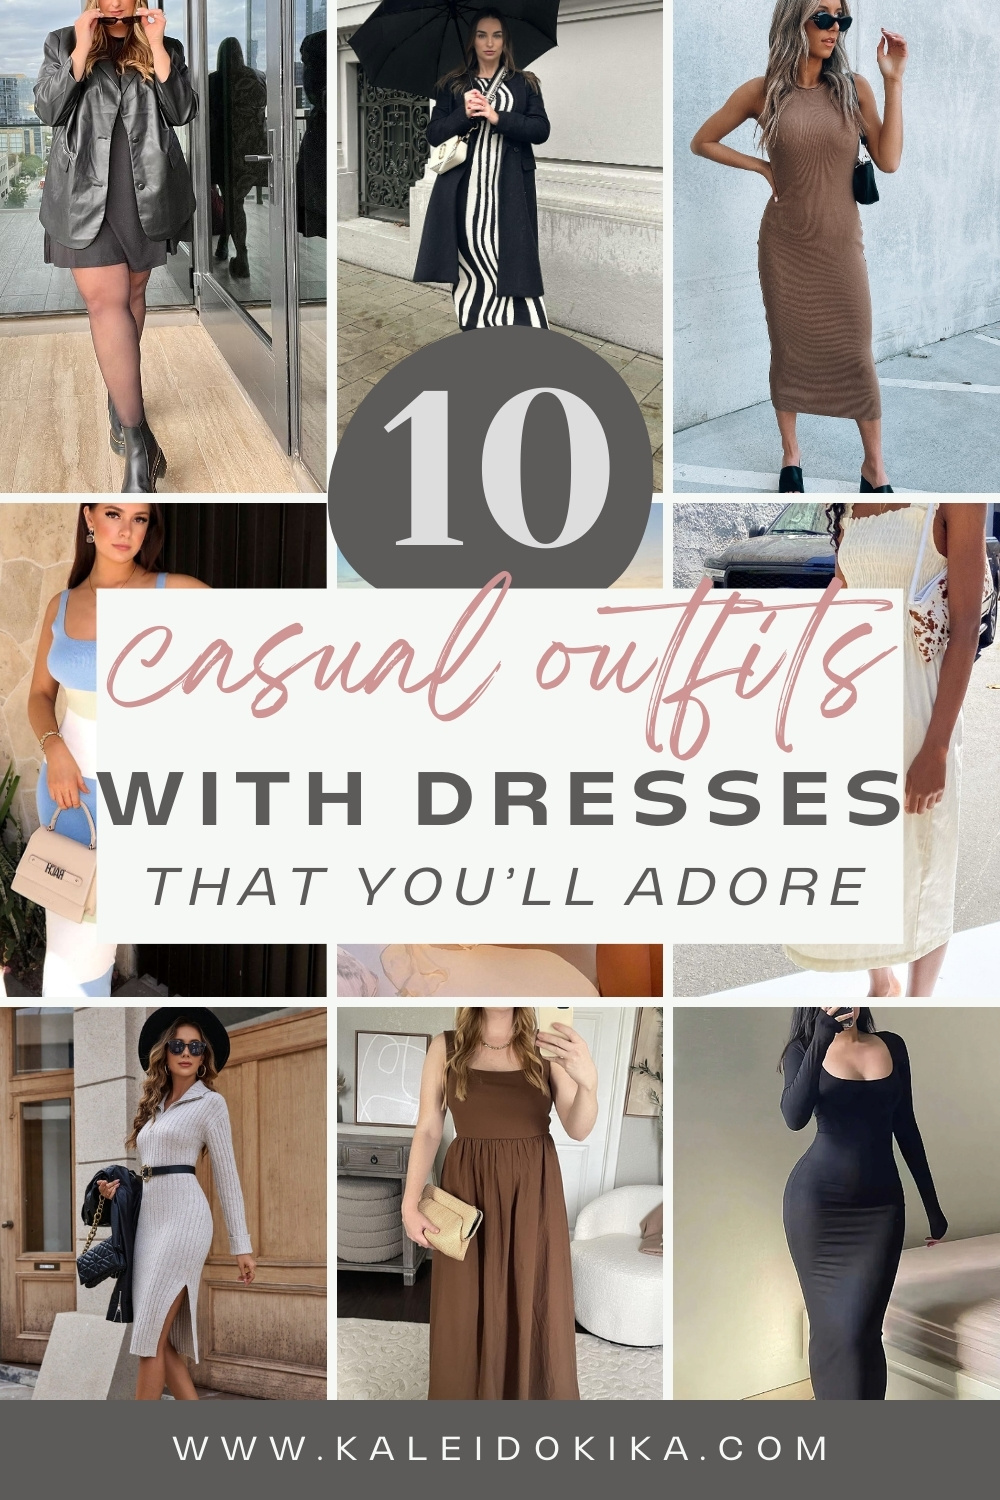 Thumbnail showing multiple images of casual outfits centered around dresses